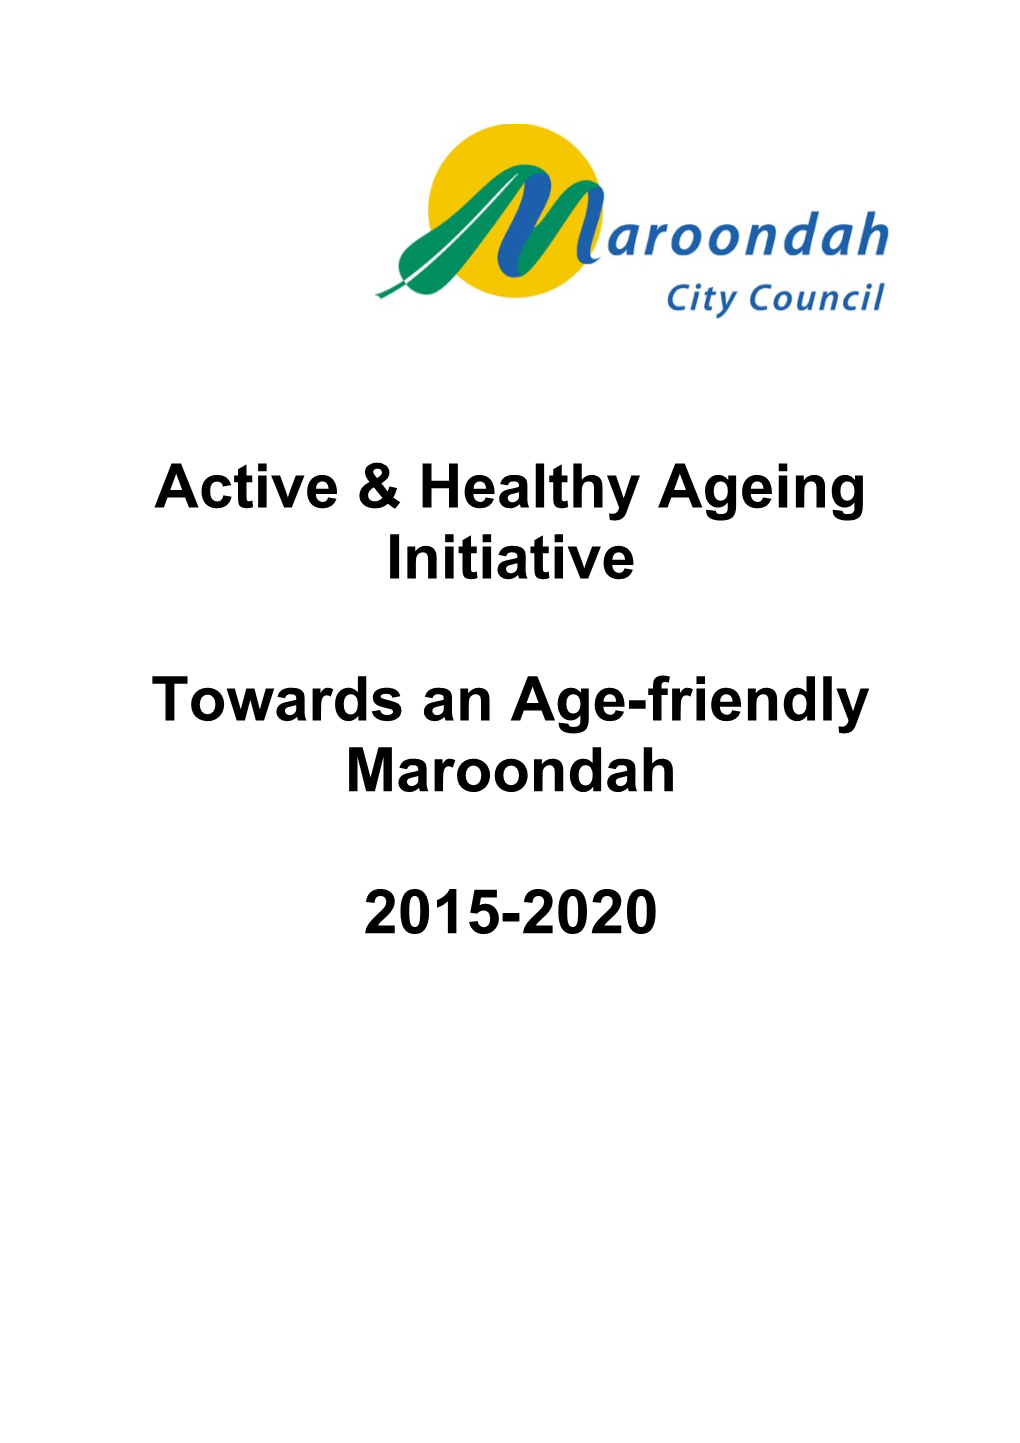 Active & Healthy Ageing Initiative